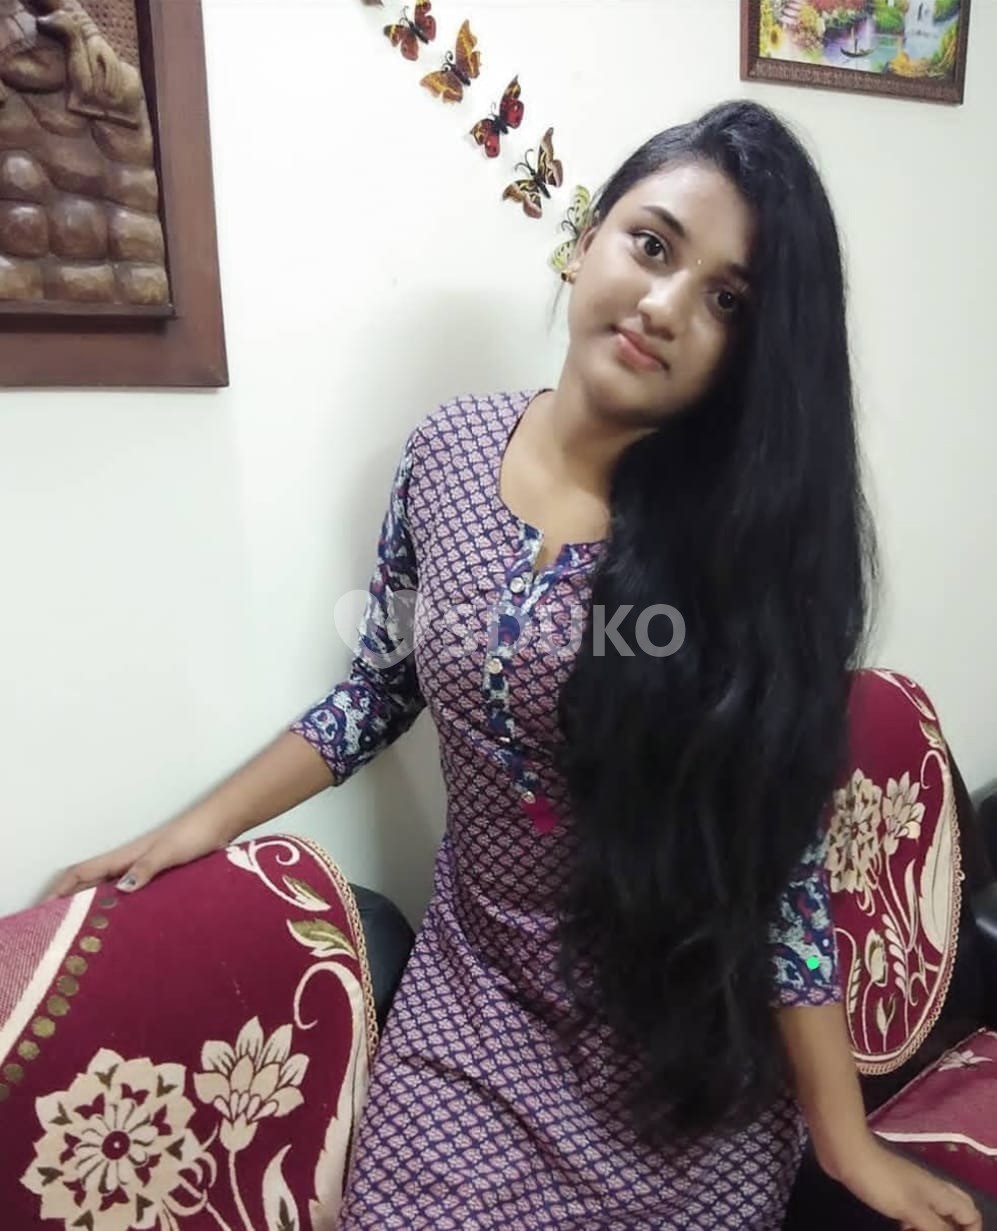 Kr Puram.................low price 🥰100% SAFE AND SECURE TODAY LOW PRICE UNLIMITED ENJOY HOT COLLEGE GIRL HOUSEWIFE A